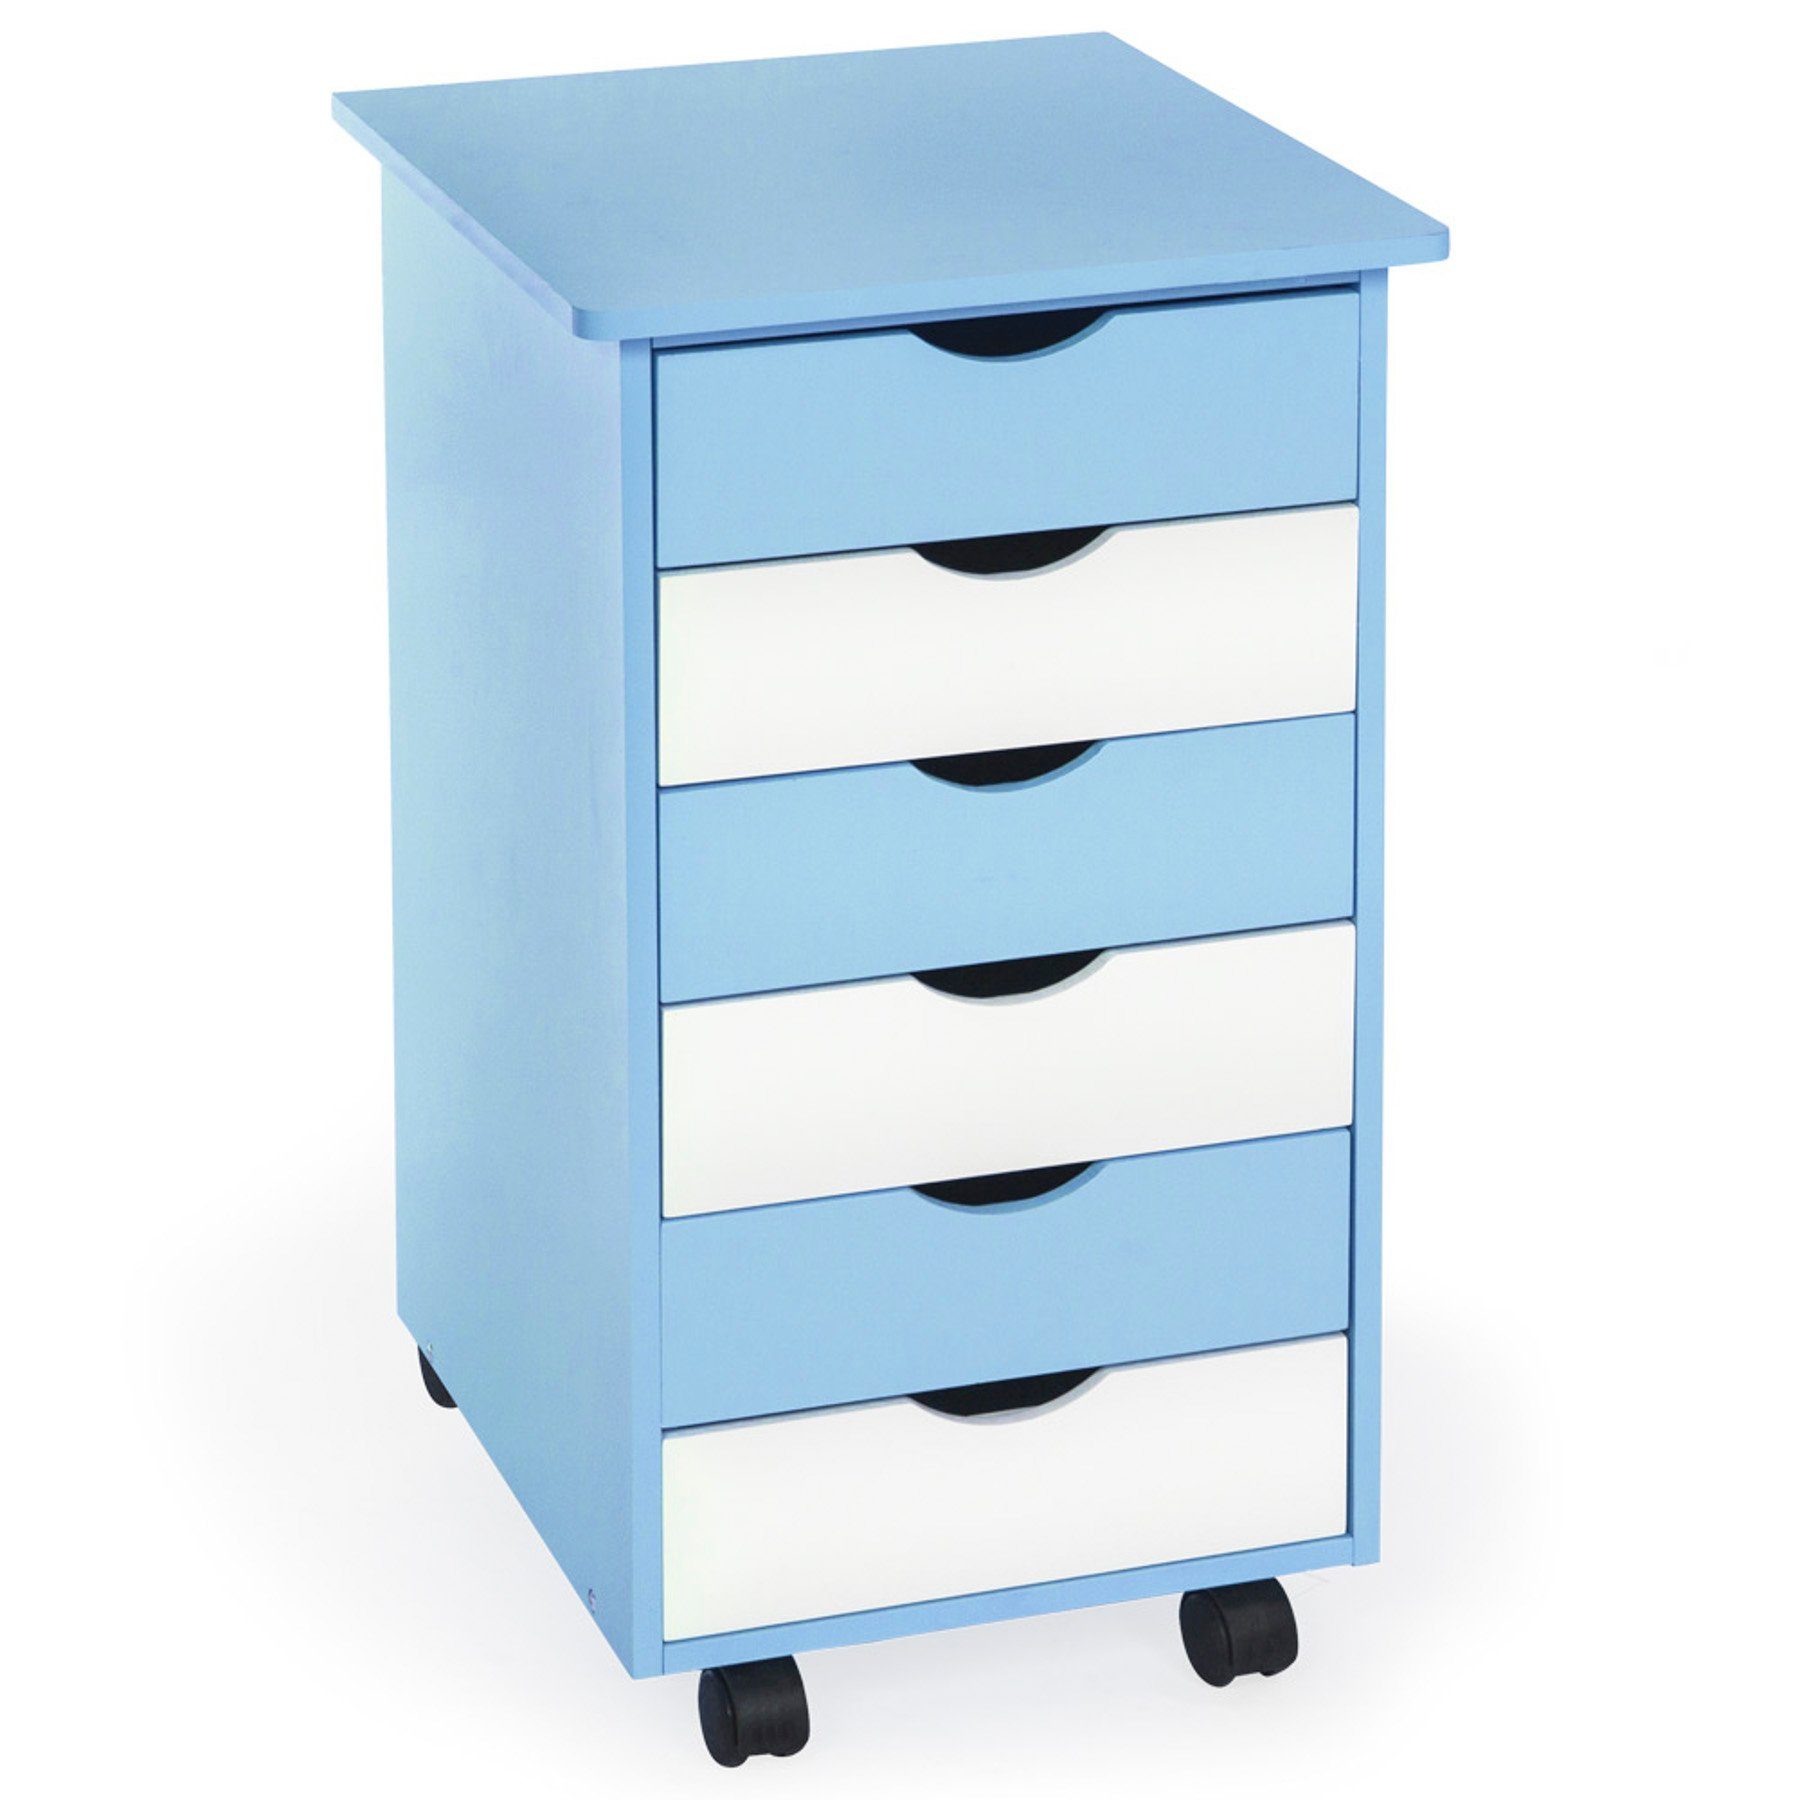 Rollcontainer tectake 65x36x40cm blau Rollcontainer aus Holz